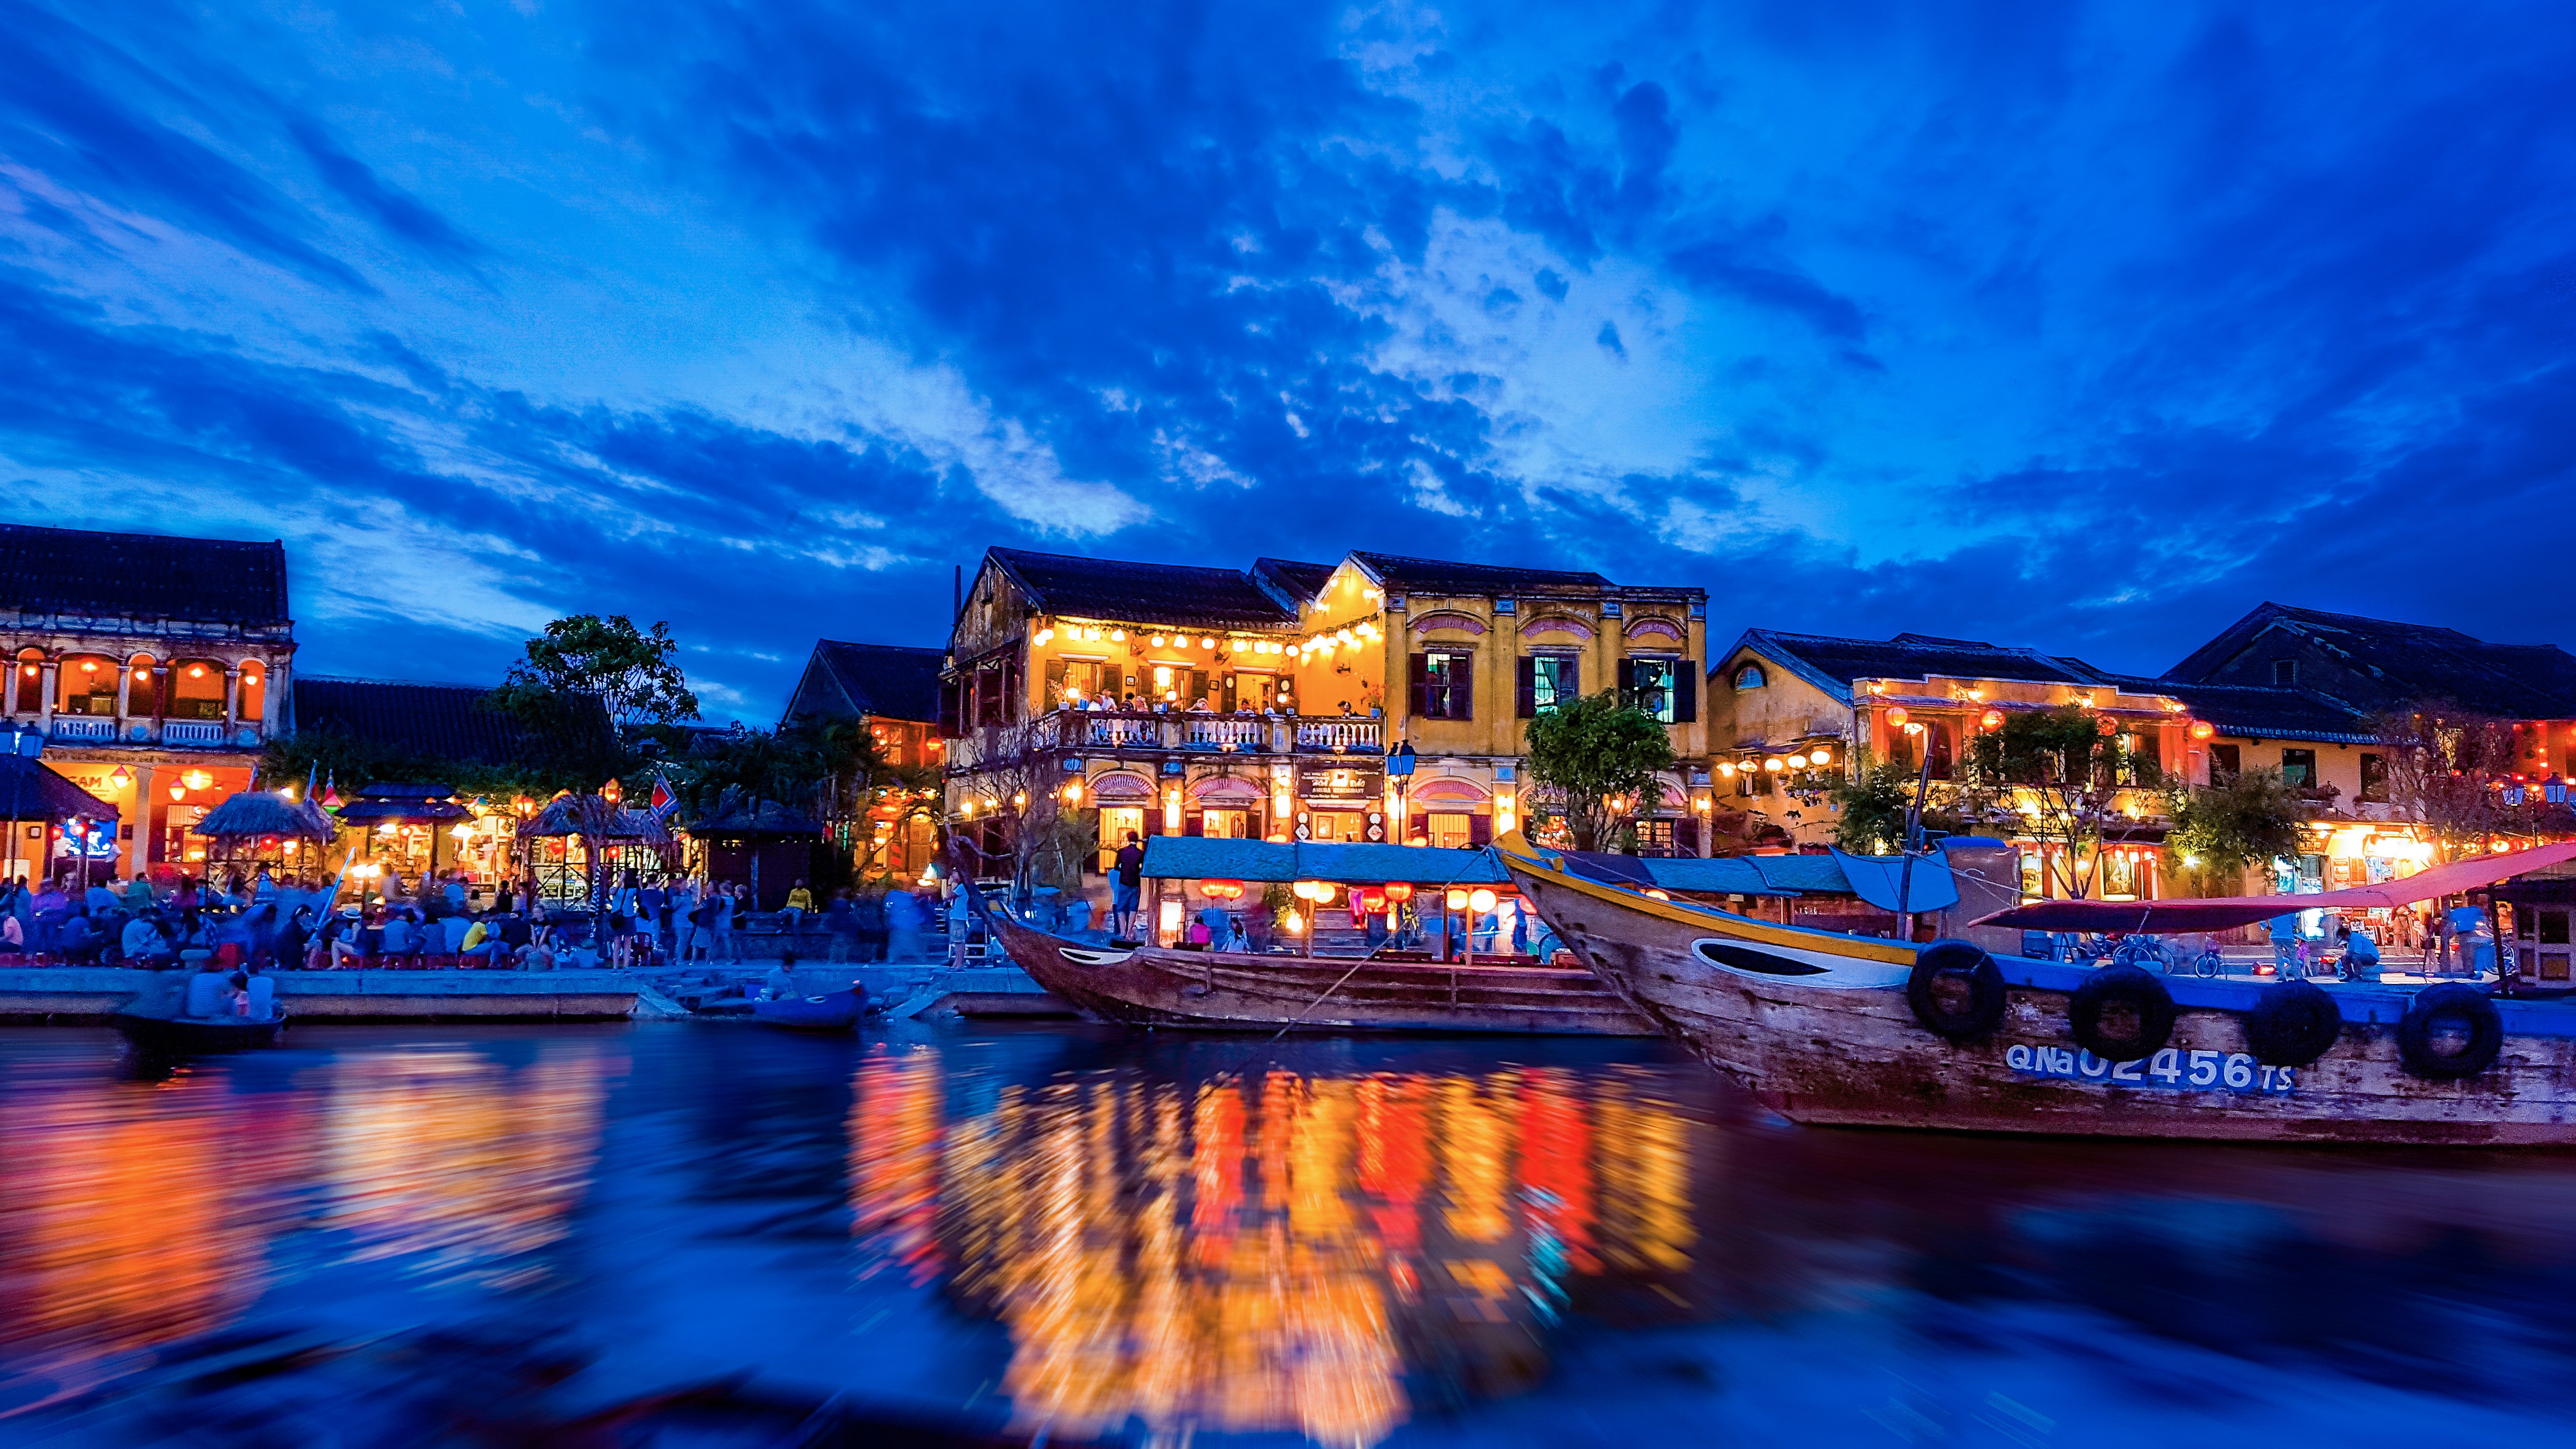 Hoi An - An ancient international trading port of Vietnam and also an UNESCO cultural heritage